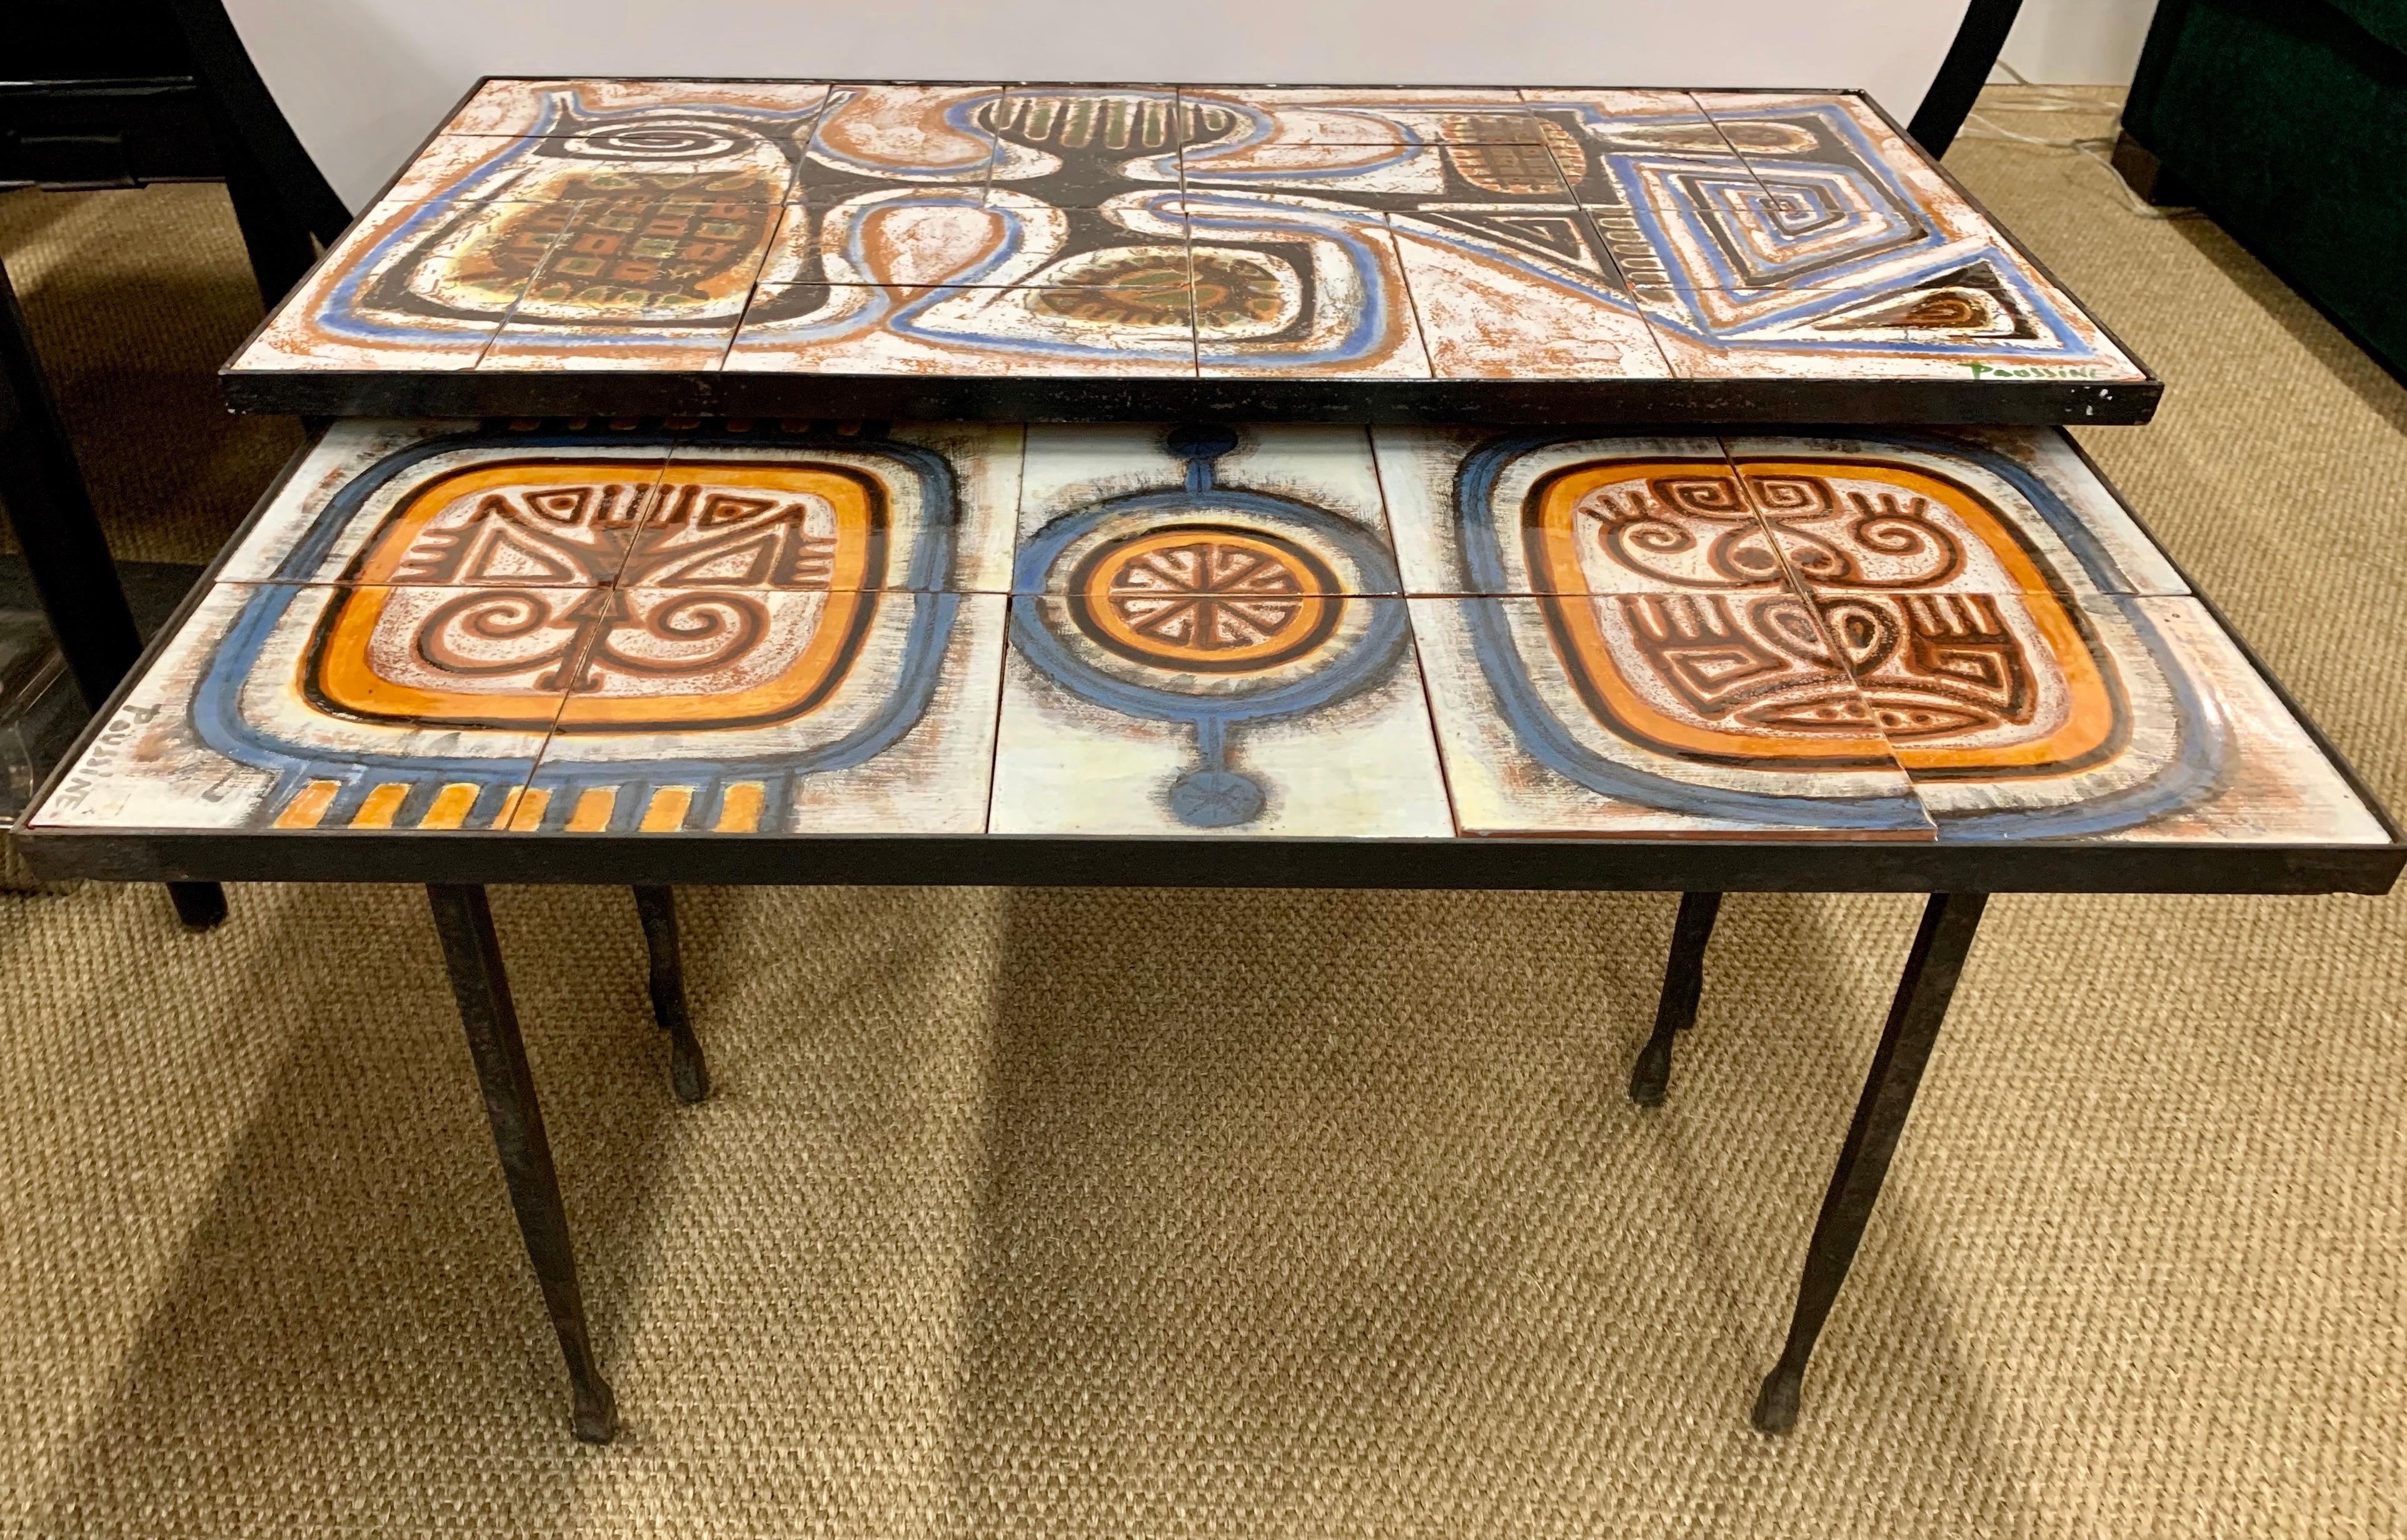 Rare pair of Italian tile top nested tables. Each table is signed by the artist on the tile. The signature reads 